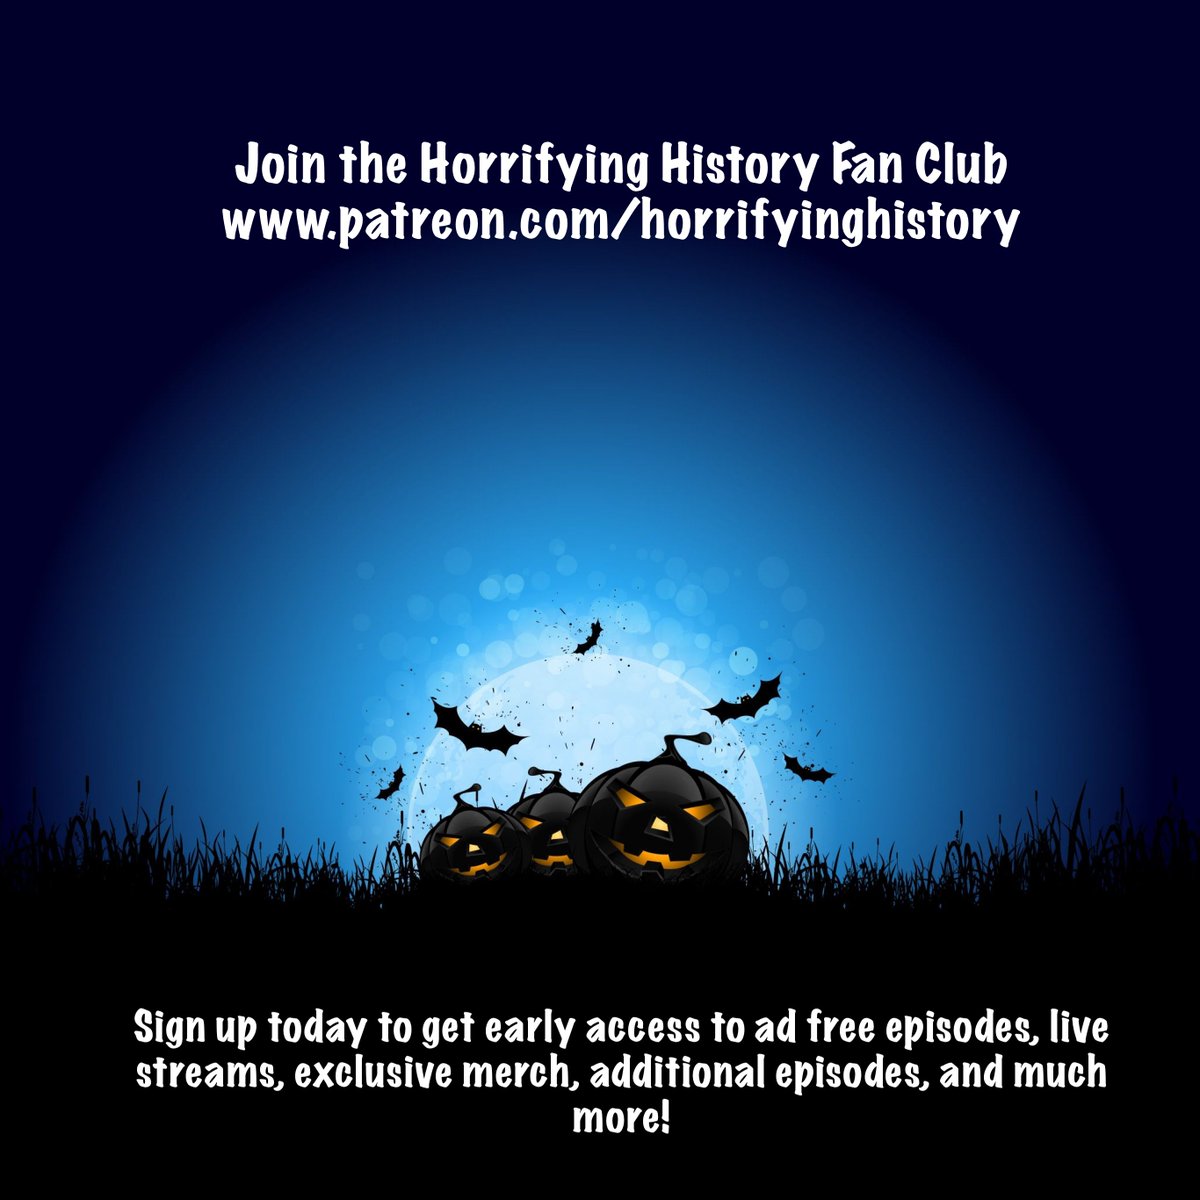 Don't miss out on this perfect opportunity to join our #fanclub on #Patreon. Embrace the #darkness, indulge in the #eerie, and become a part of something truly #haunting. Sign up today and experience the world of #HorrifyingHistory like never before‼️